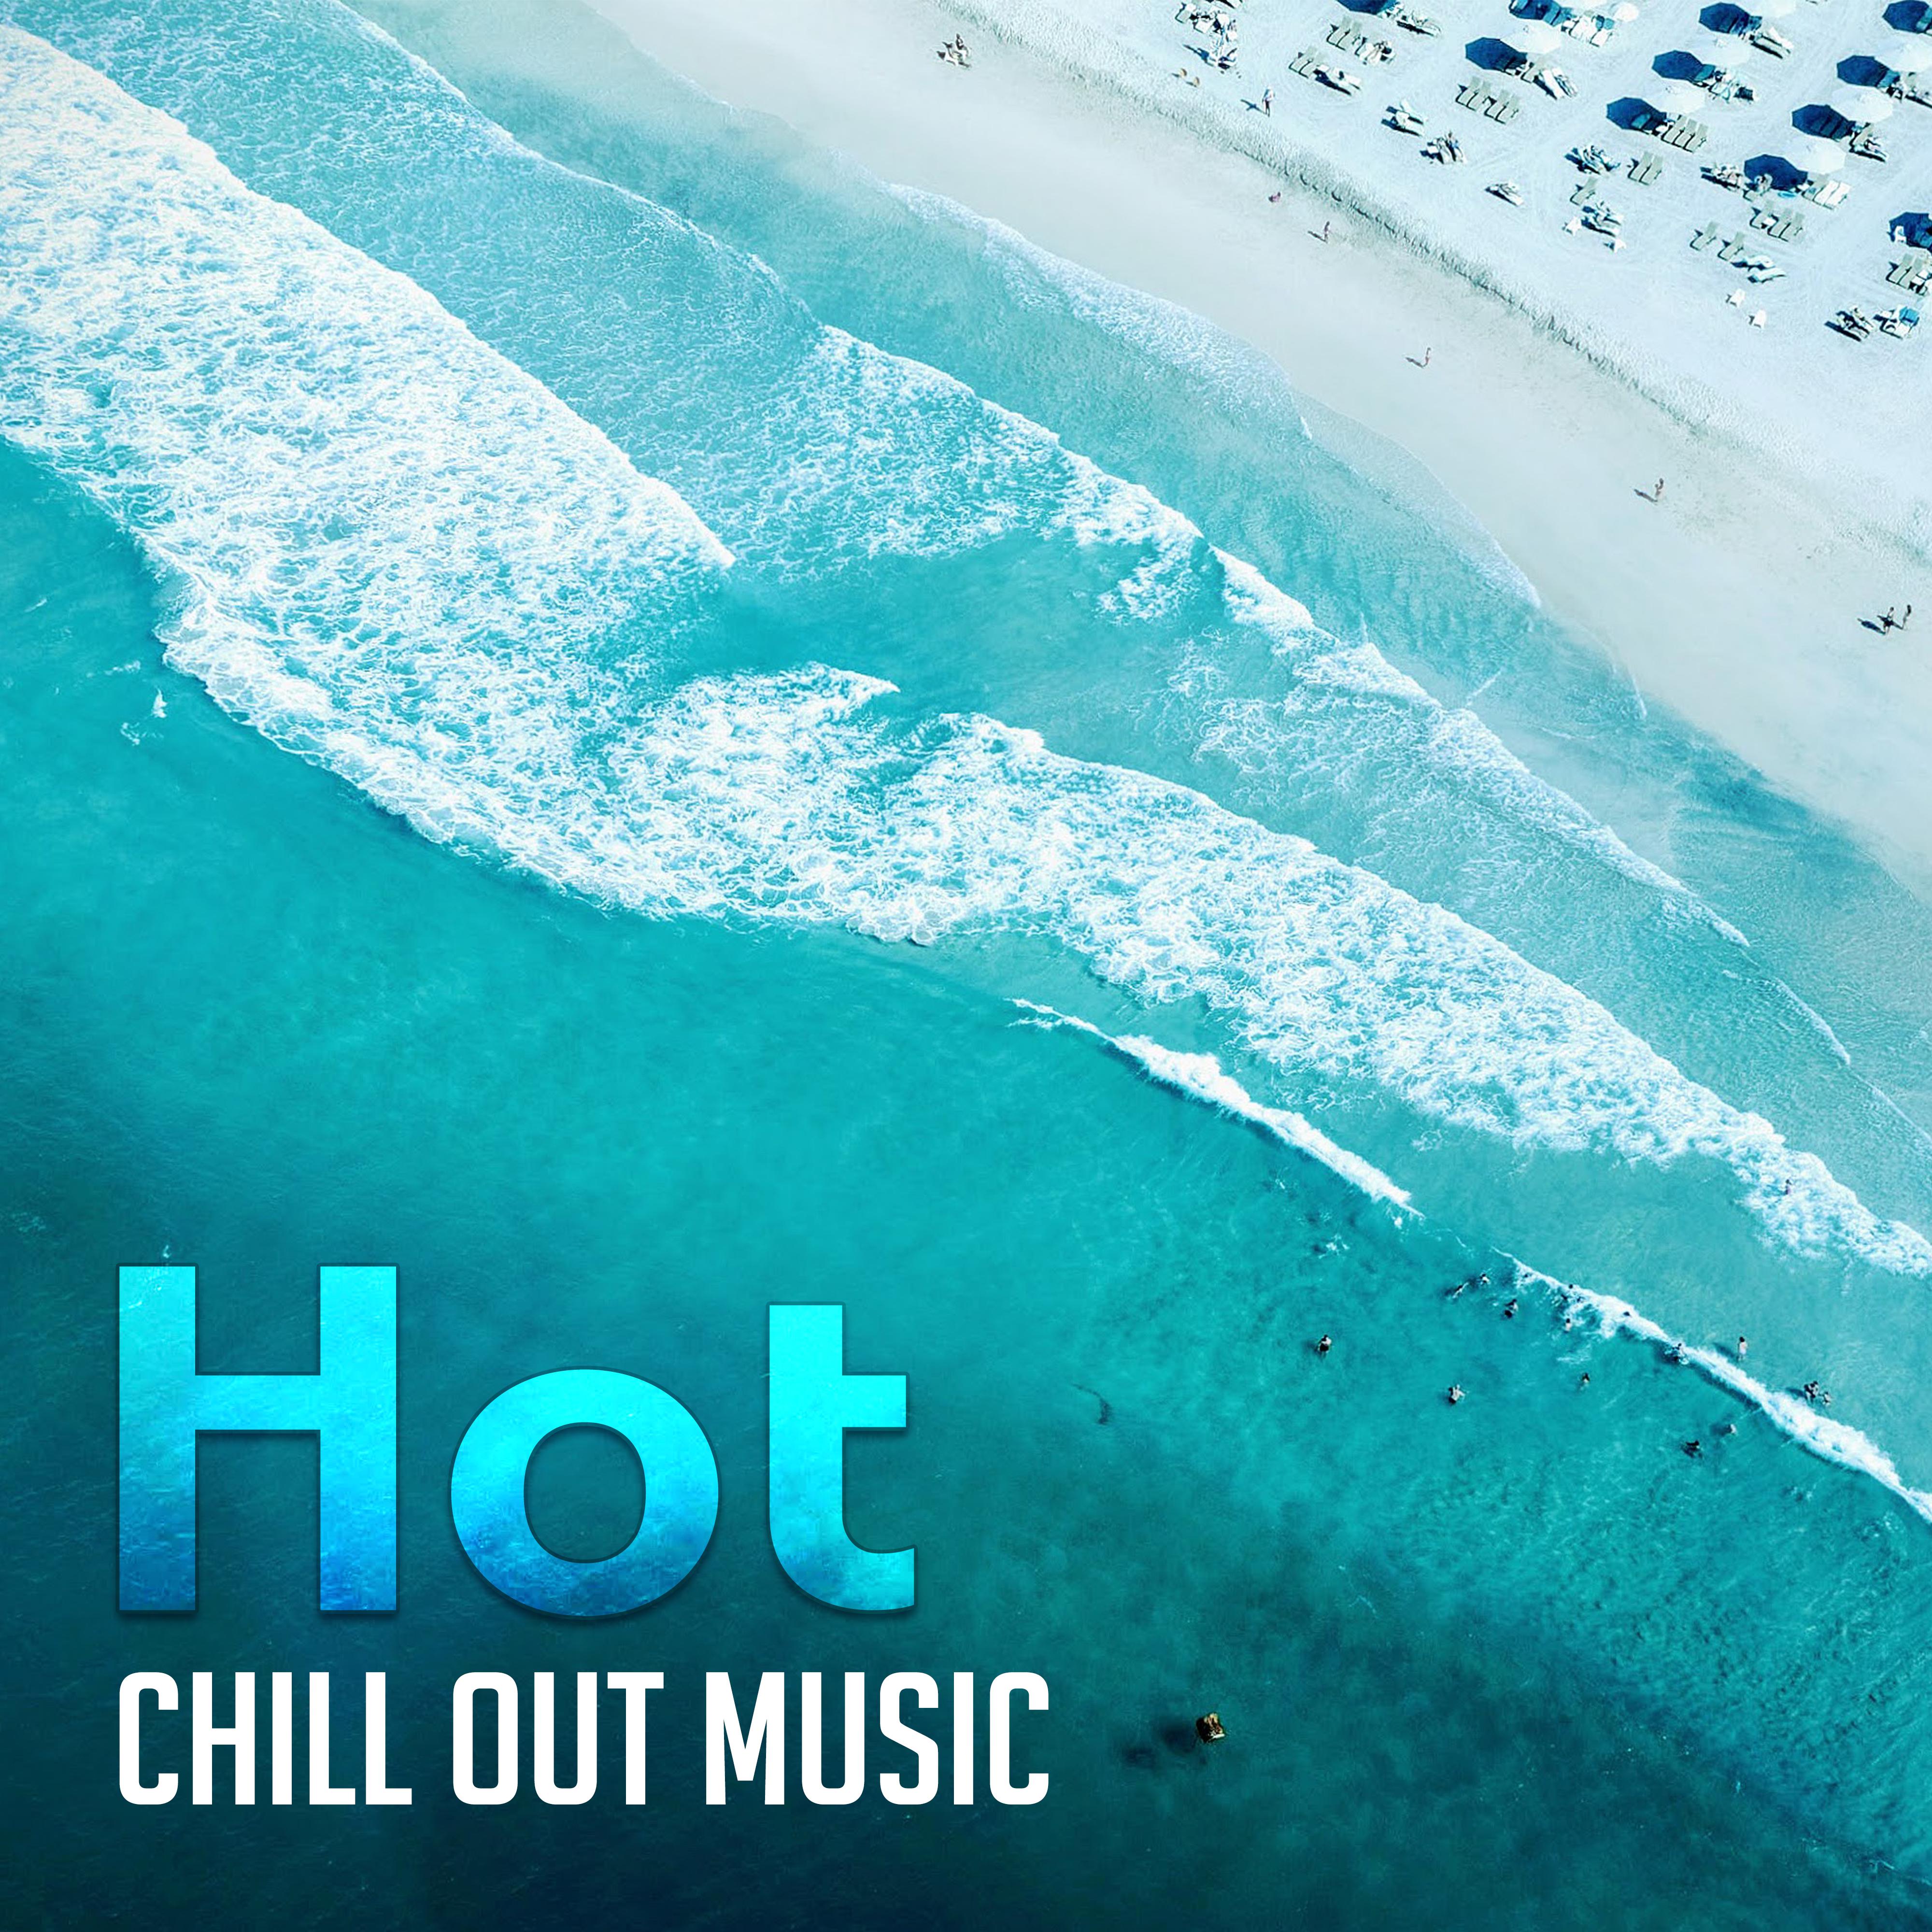 Hot Chill Out Music – Relaxation, Sensual Dance, *** Music 69, Ibiza Chill Out, Deep Vibes, Beach Chill, *** on the Beach